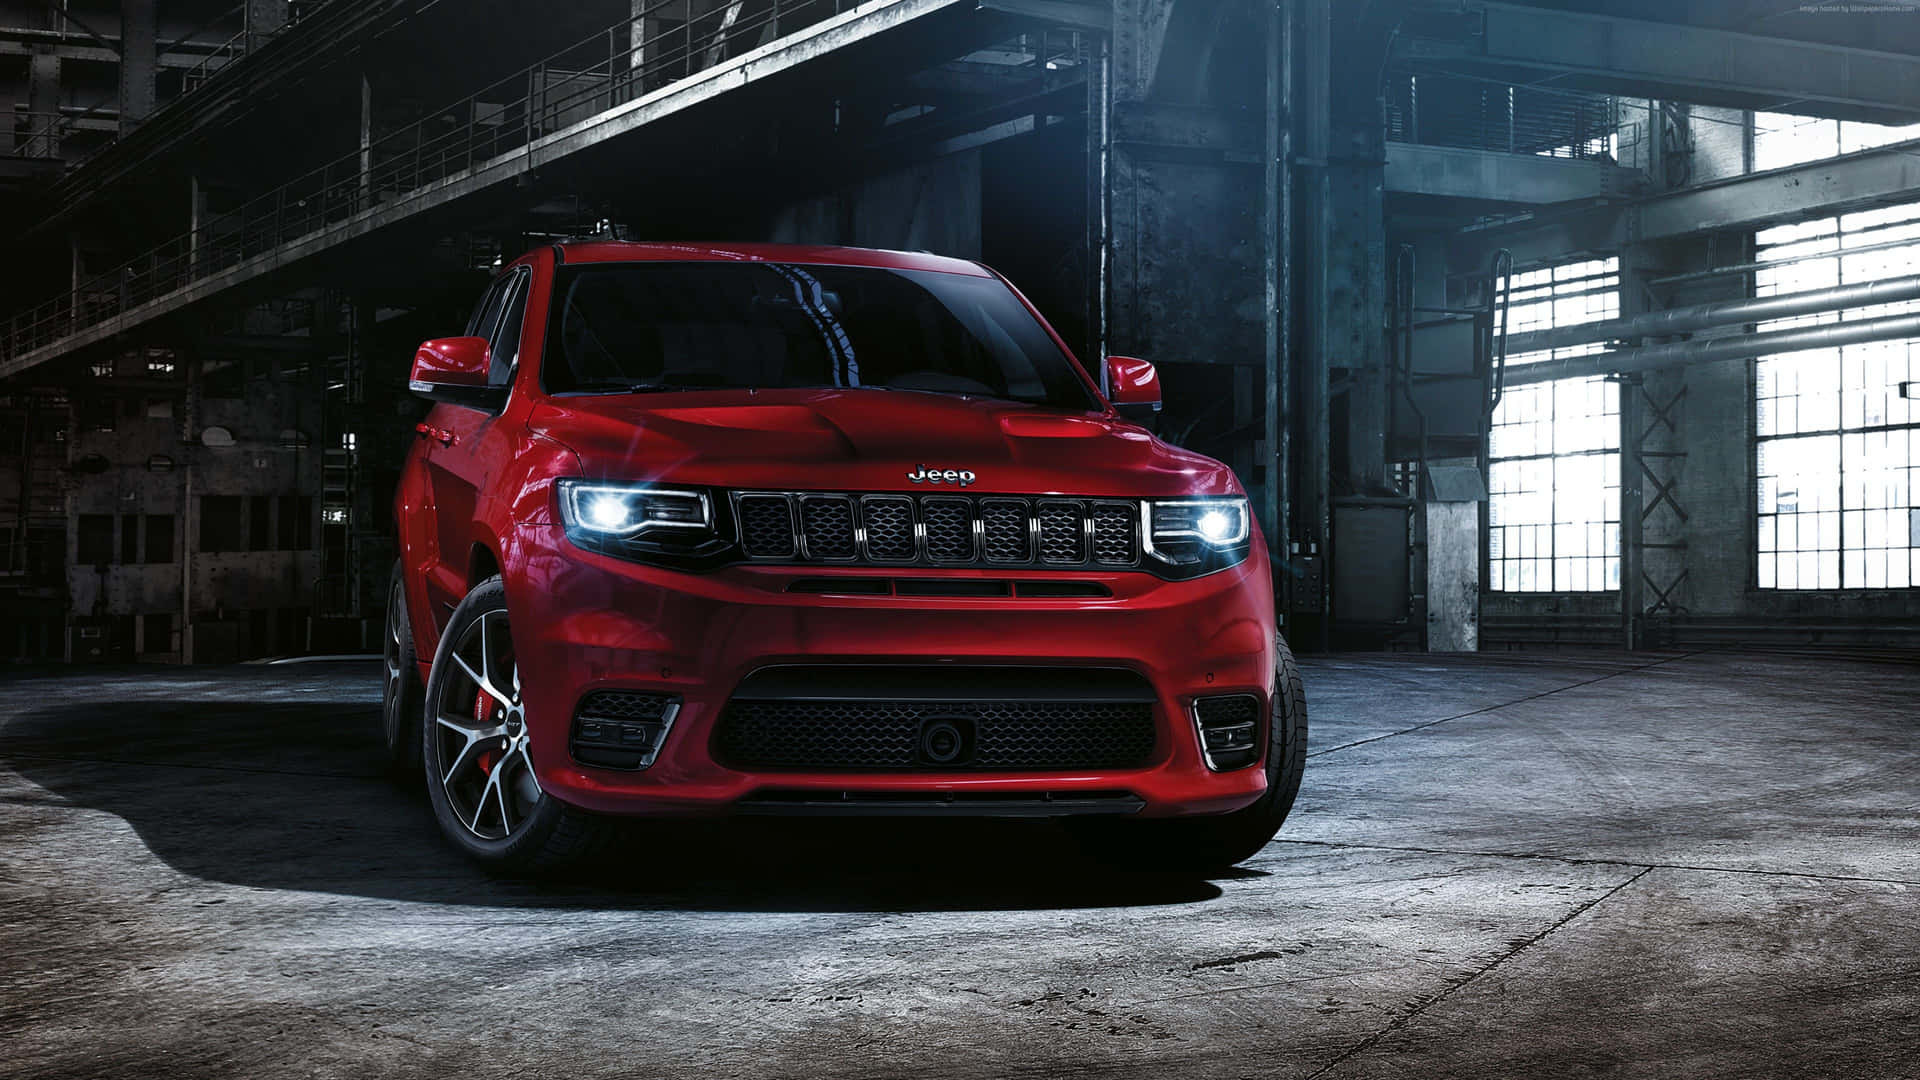 Take a ride in the powerful Jeep Trackhawk Wallpaper